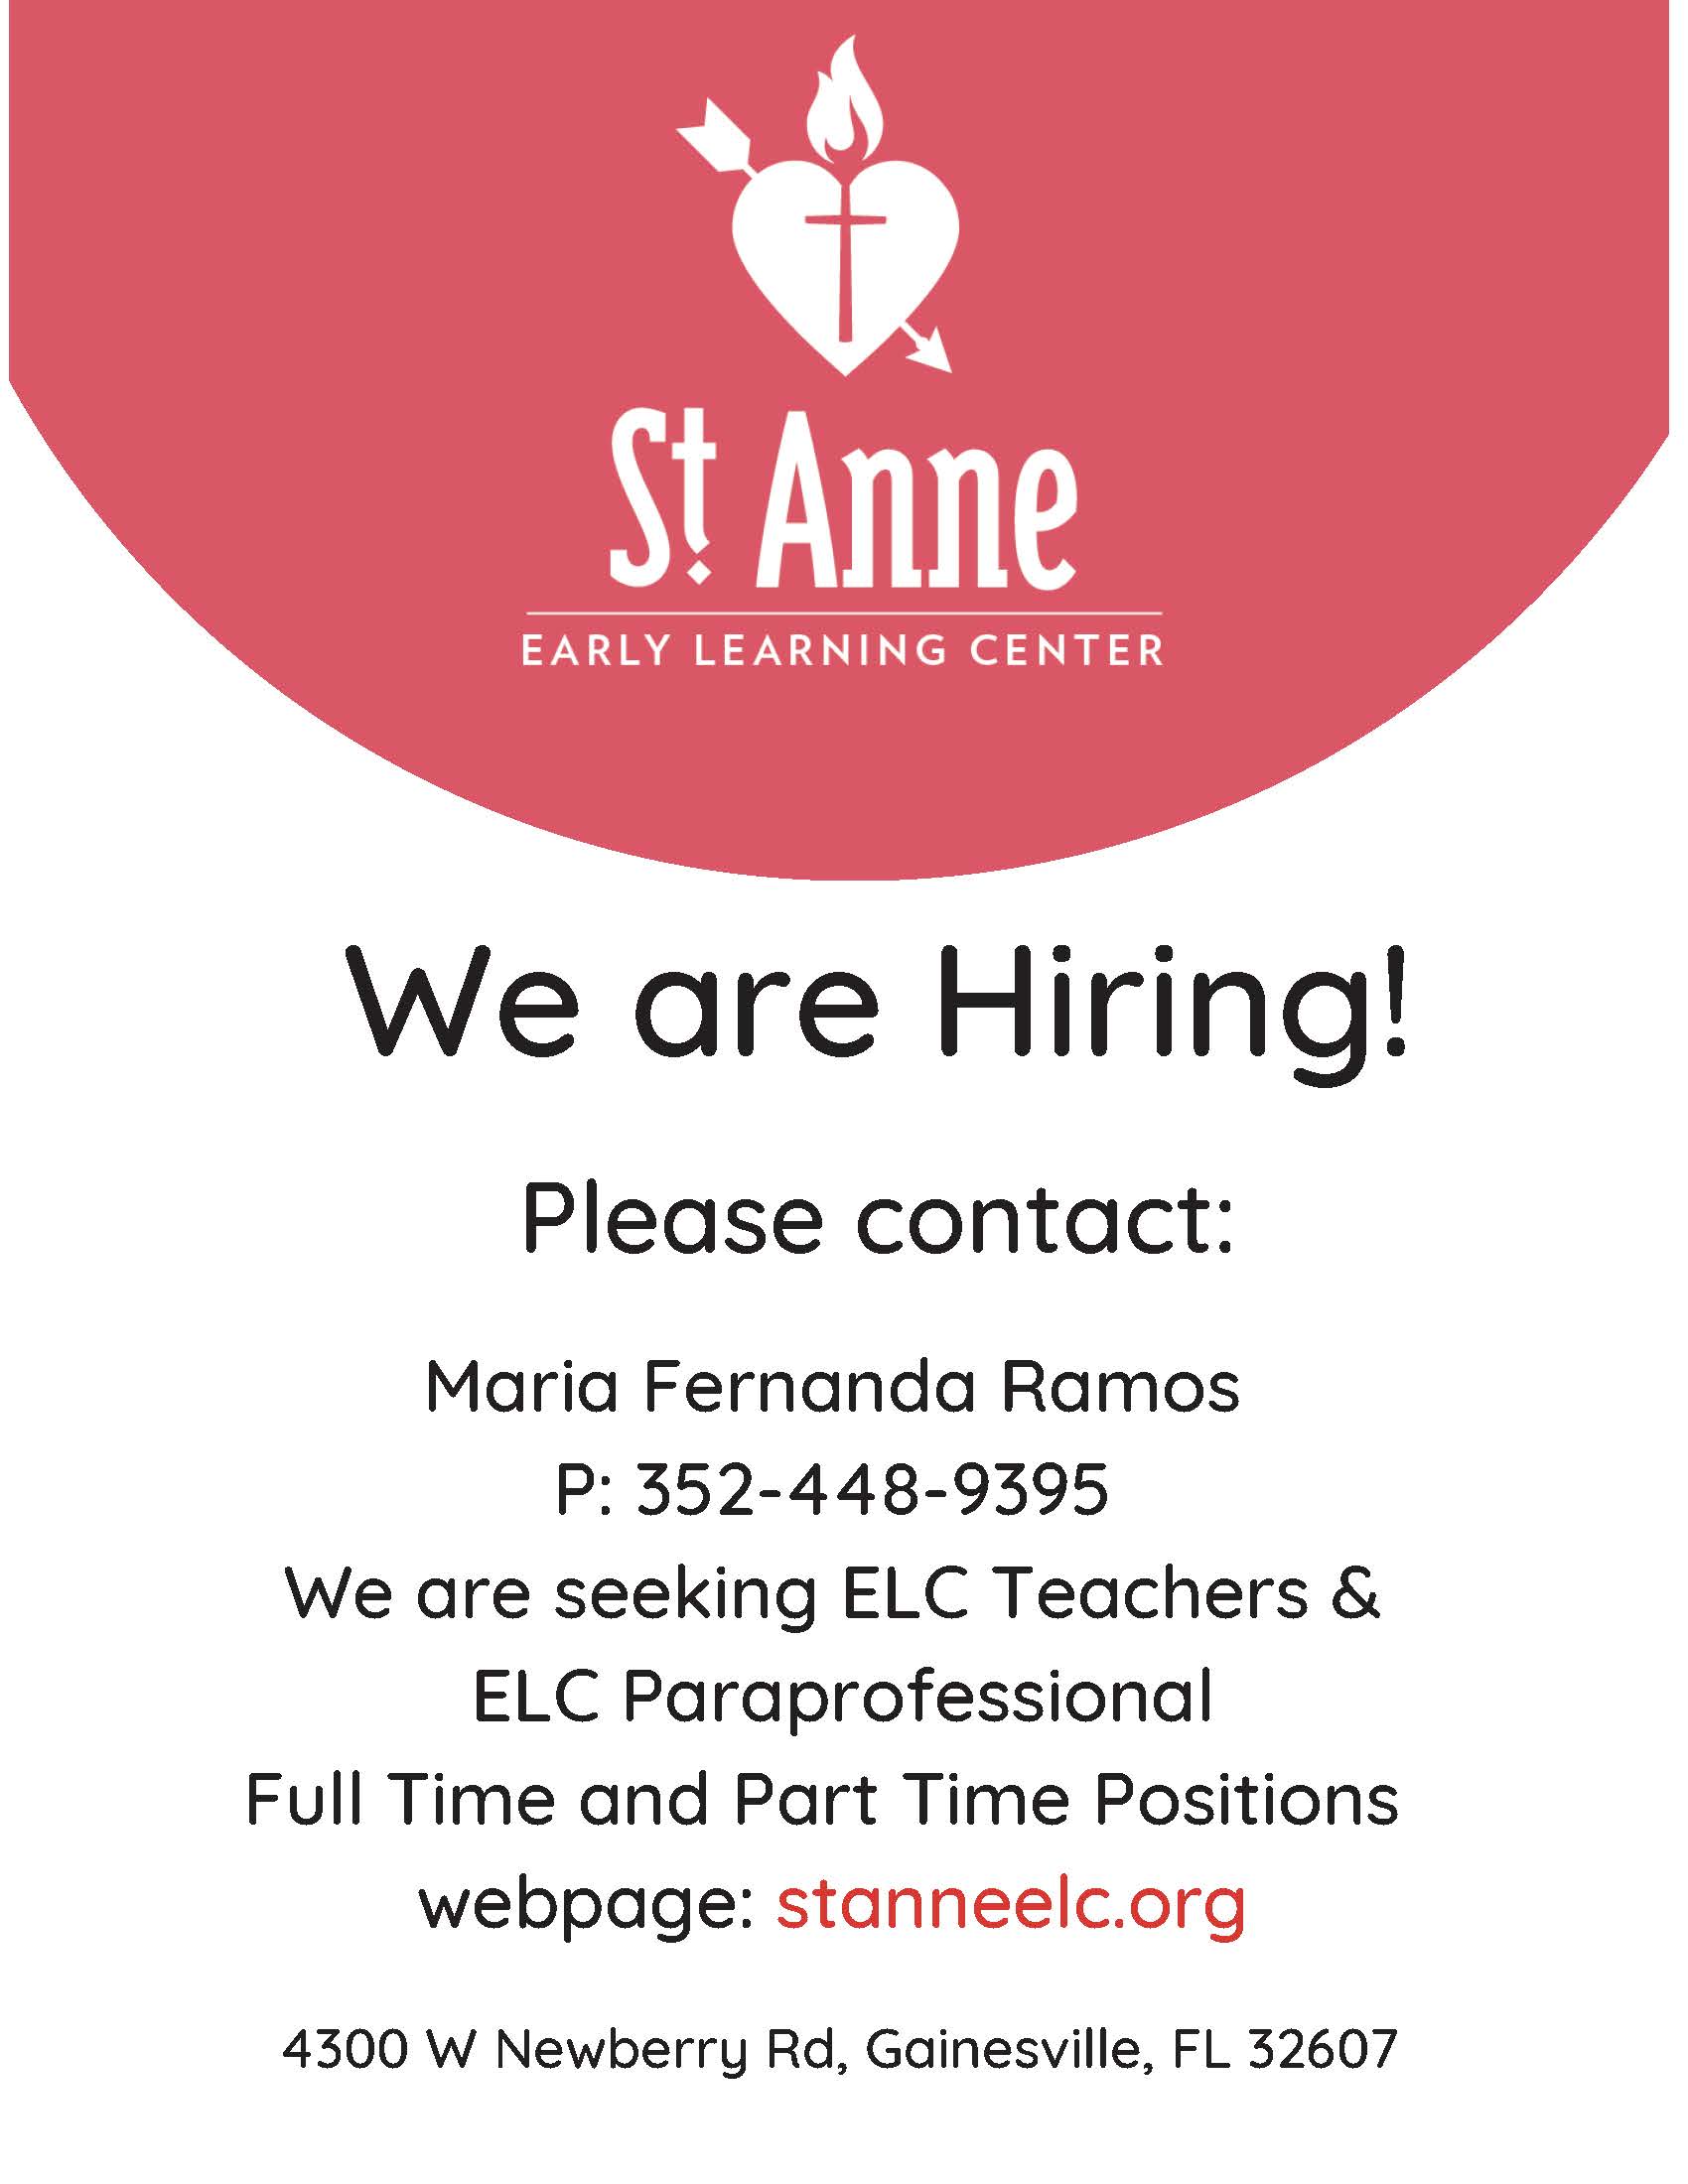 St Anne Early Learning Center - Hiring ELC Teachers & ELC Paraprofessional Full Time and Part Time 